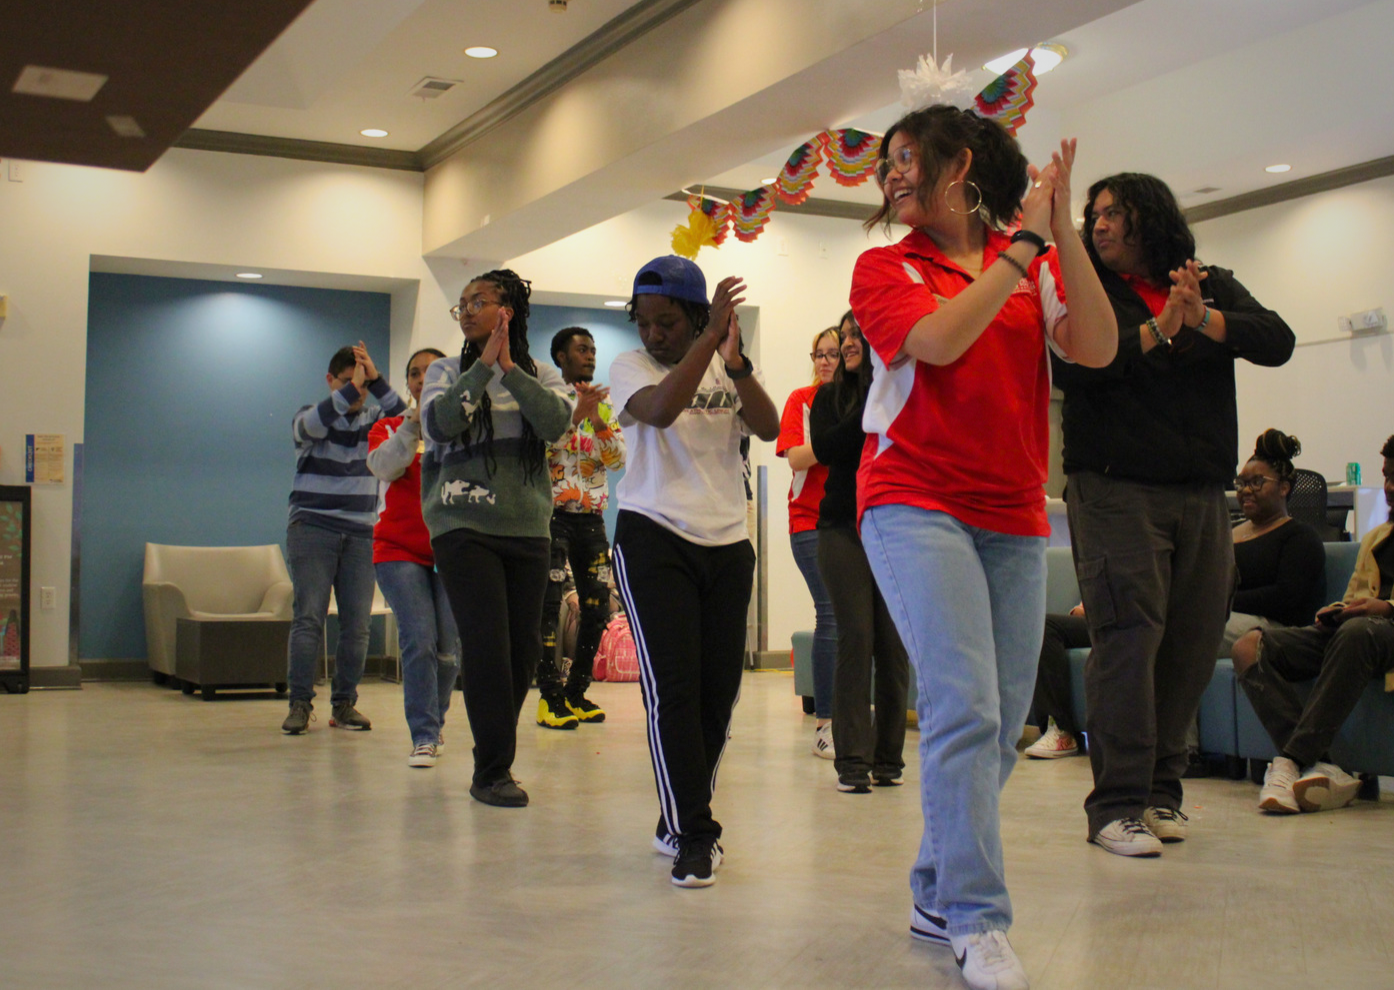 At the Office of Multicultural Affairs Latin Night event, students dance following the steps of a Zumba instructor.